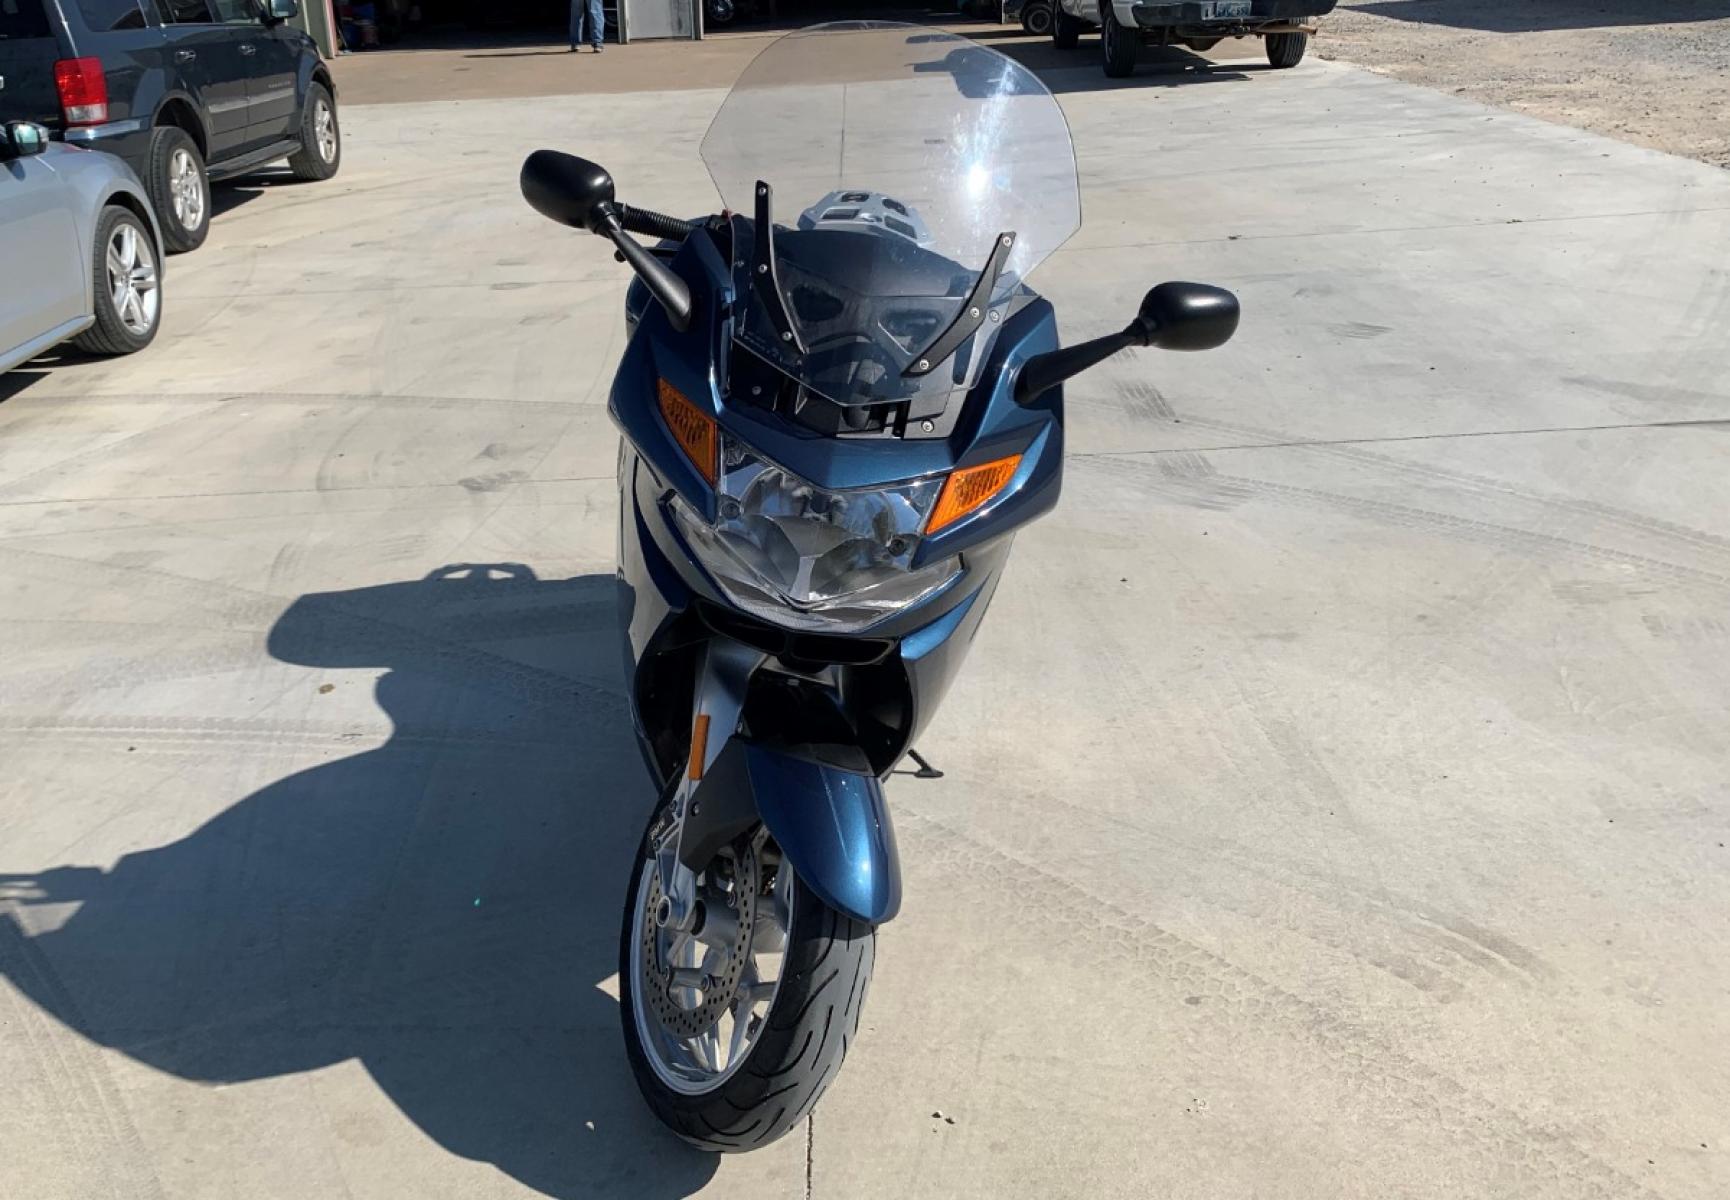 2007 BLUE BMW K1200GT K1200 (WB10597087Z) with an 1157CC engine, located at 17760 HWY 62, MORRIS, 74445, 35.609104, -95.877060 - THE 2007 BMW K1200GT IS A SPORT-TOURING MOTORCYCLE MADE BY BMW. THE SECOND GENERATION K1200GT, INTRODUCED IN 2006, USES ESSENTULY THE SAME INLINE-4 ENGINE AS THE BMW K1200S SPORTSBIKE, WHICH HELD THE WORLD SPEED RECORD IN 2005 FOR ITS CLASS AT 279.33 km/h (173.57 mph), AND THE K1200R. THE NEW MODEL - Photo #2